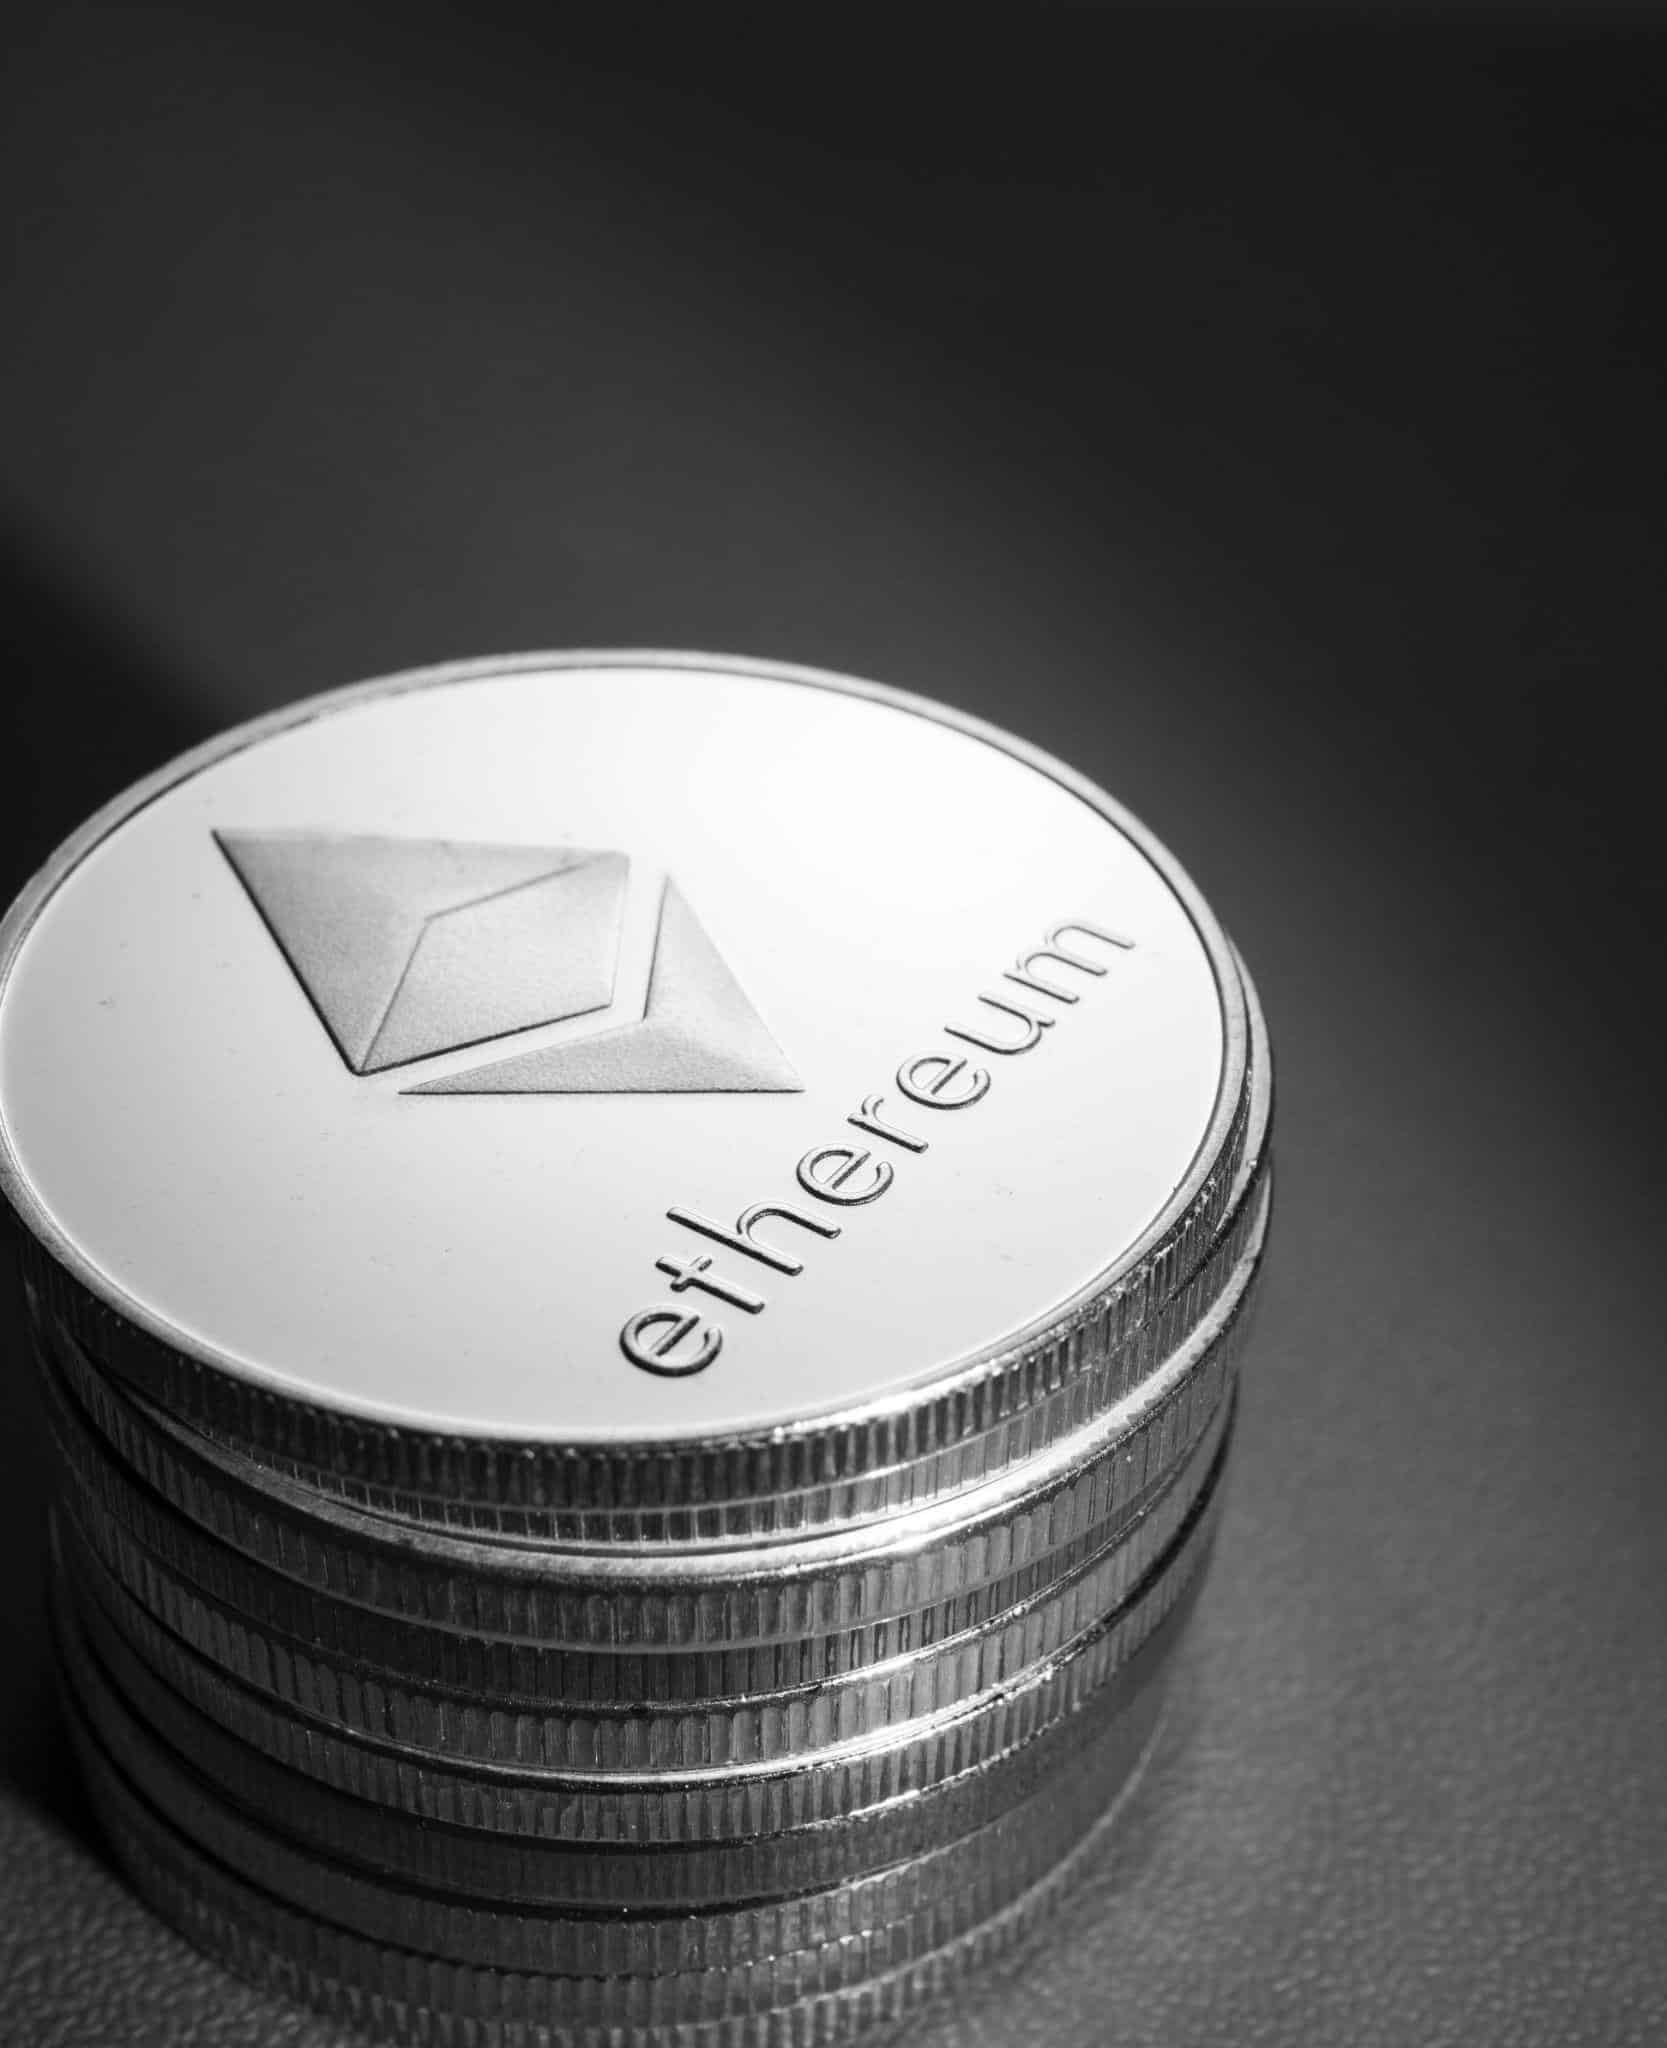 Image of Ethereum coins